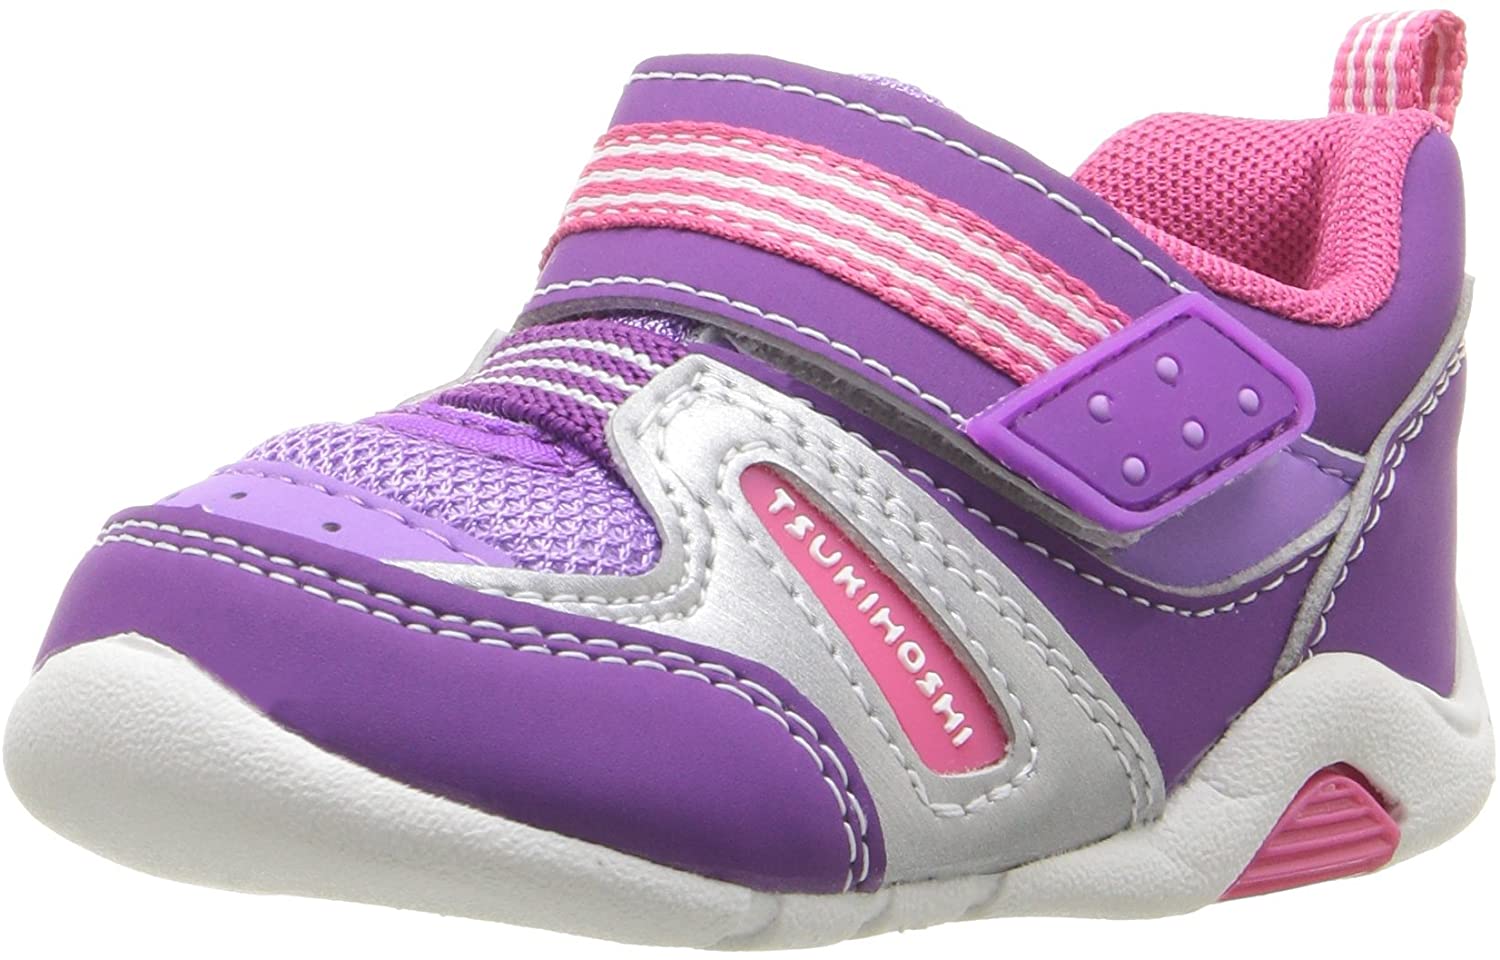 Baby Tsukihoshi Neko Sneaker  in Purple/Berry from the front view